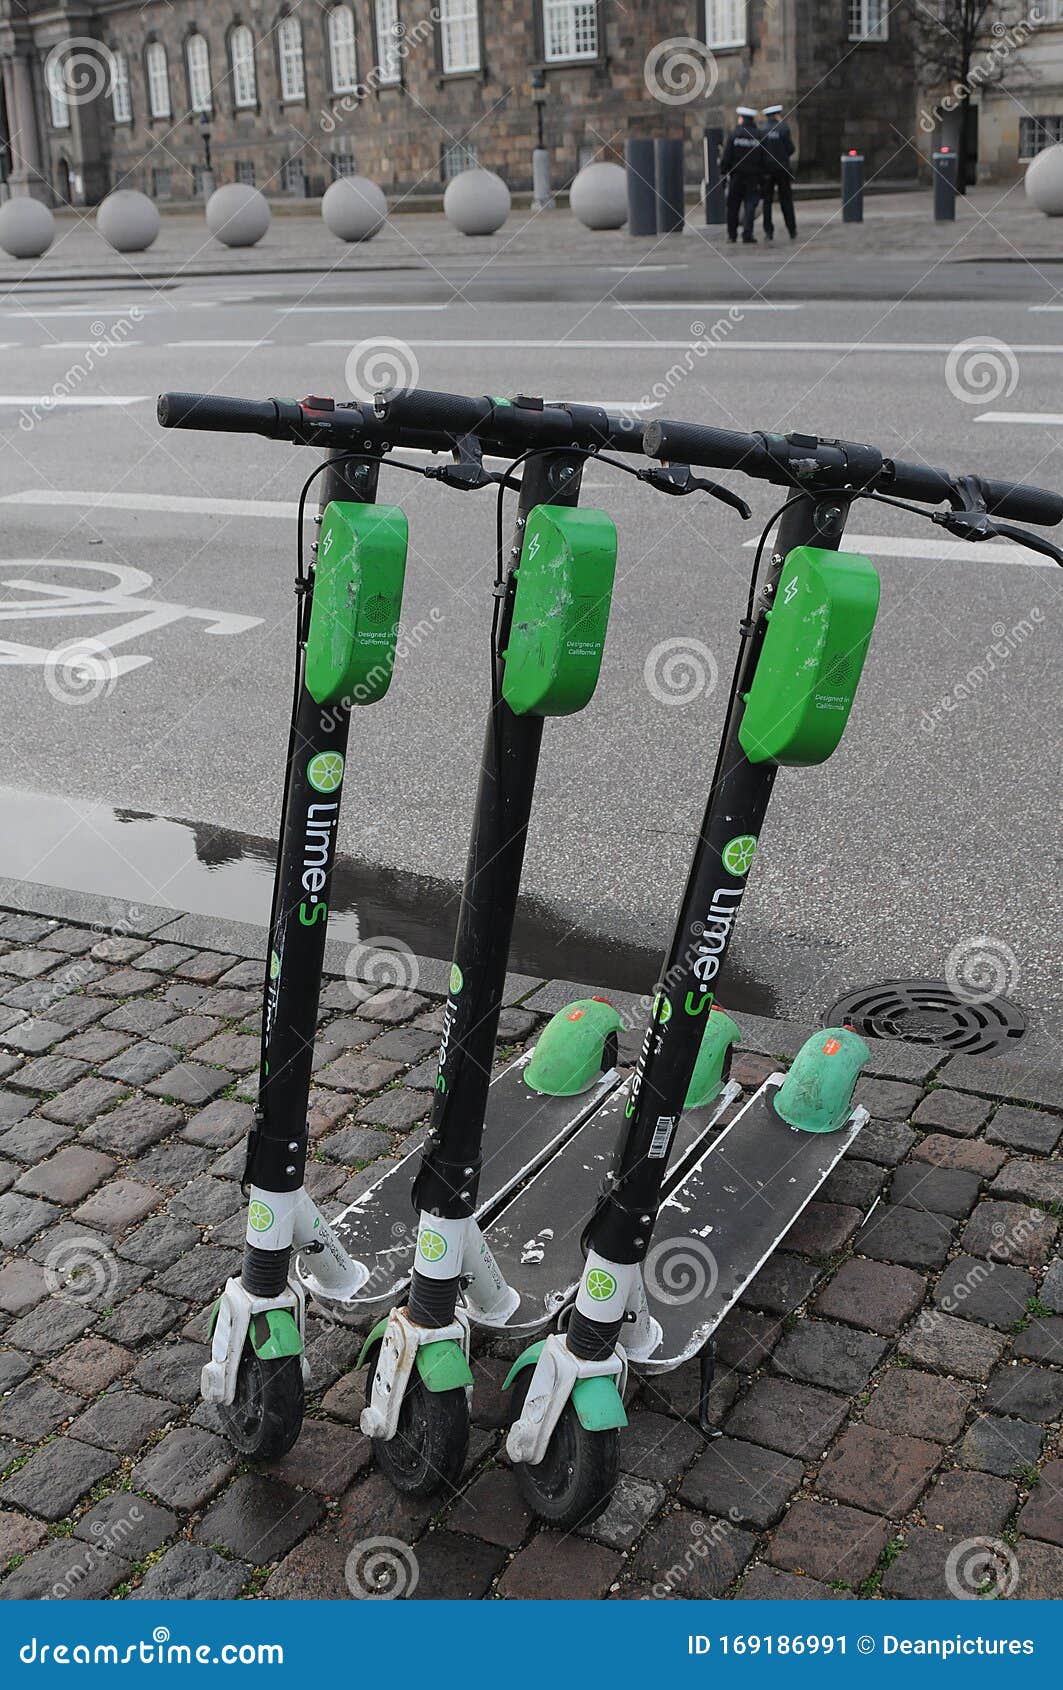 LIME or LIME S ELECTRIC are CALIFORNIA DESIGN Editorial Photo - Image of scooters, kopemhagen: 169186991